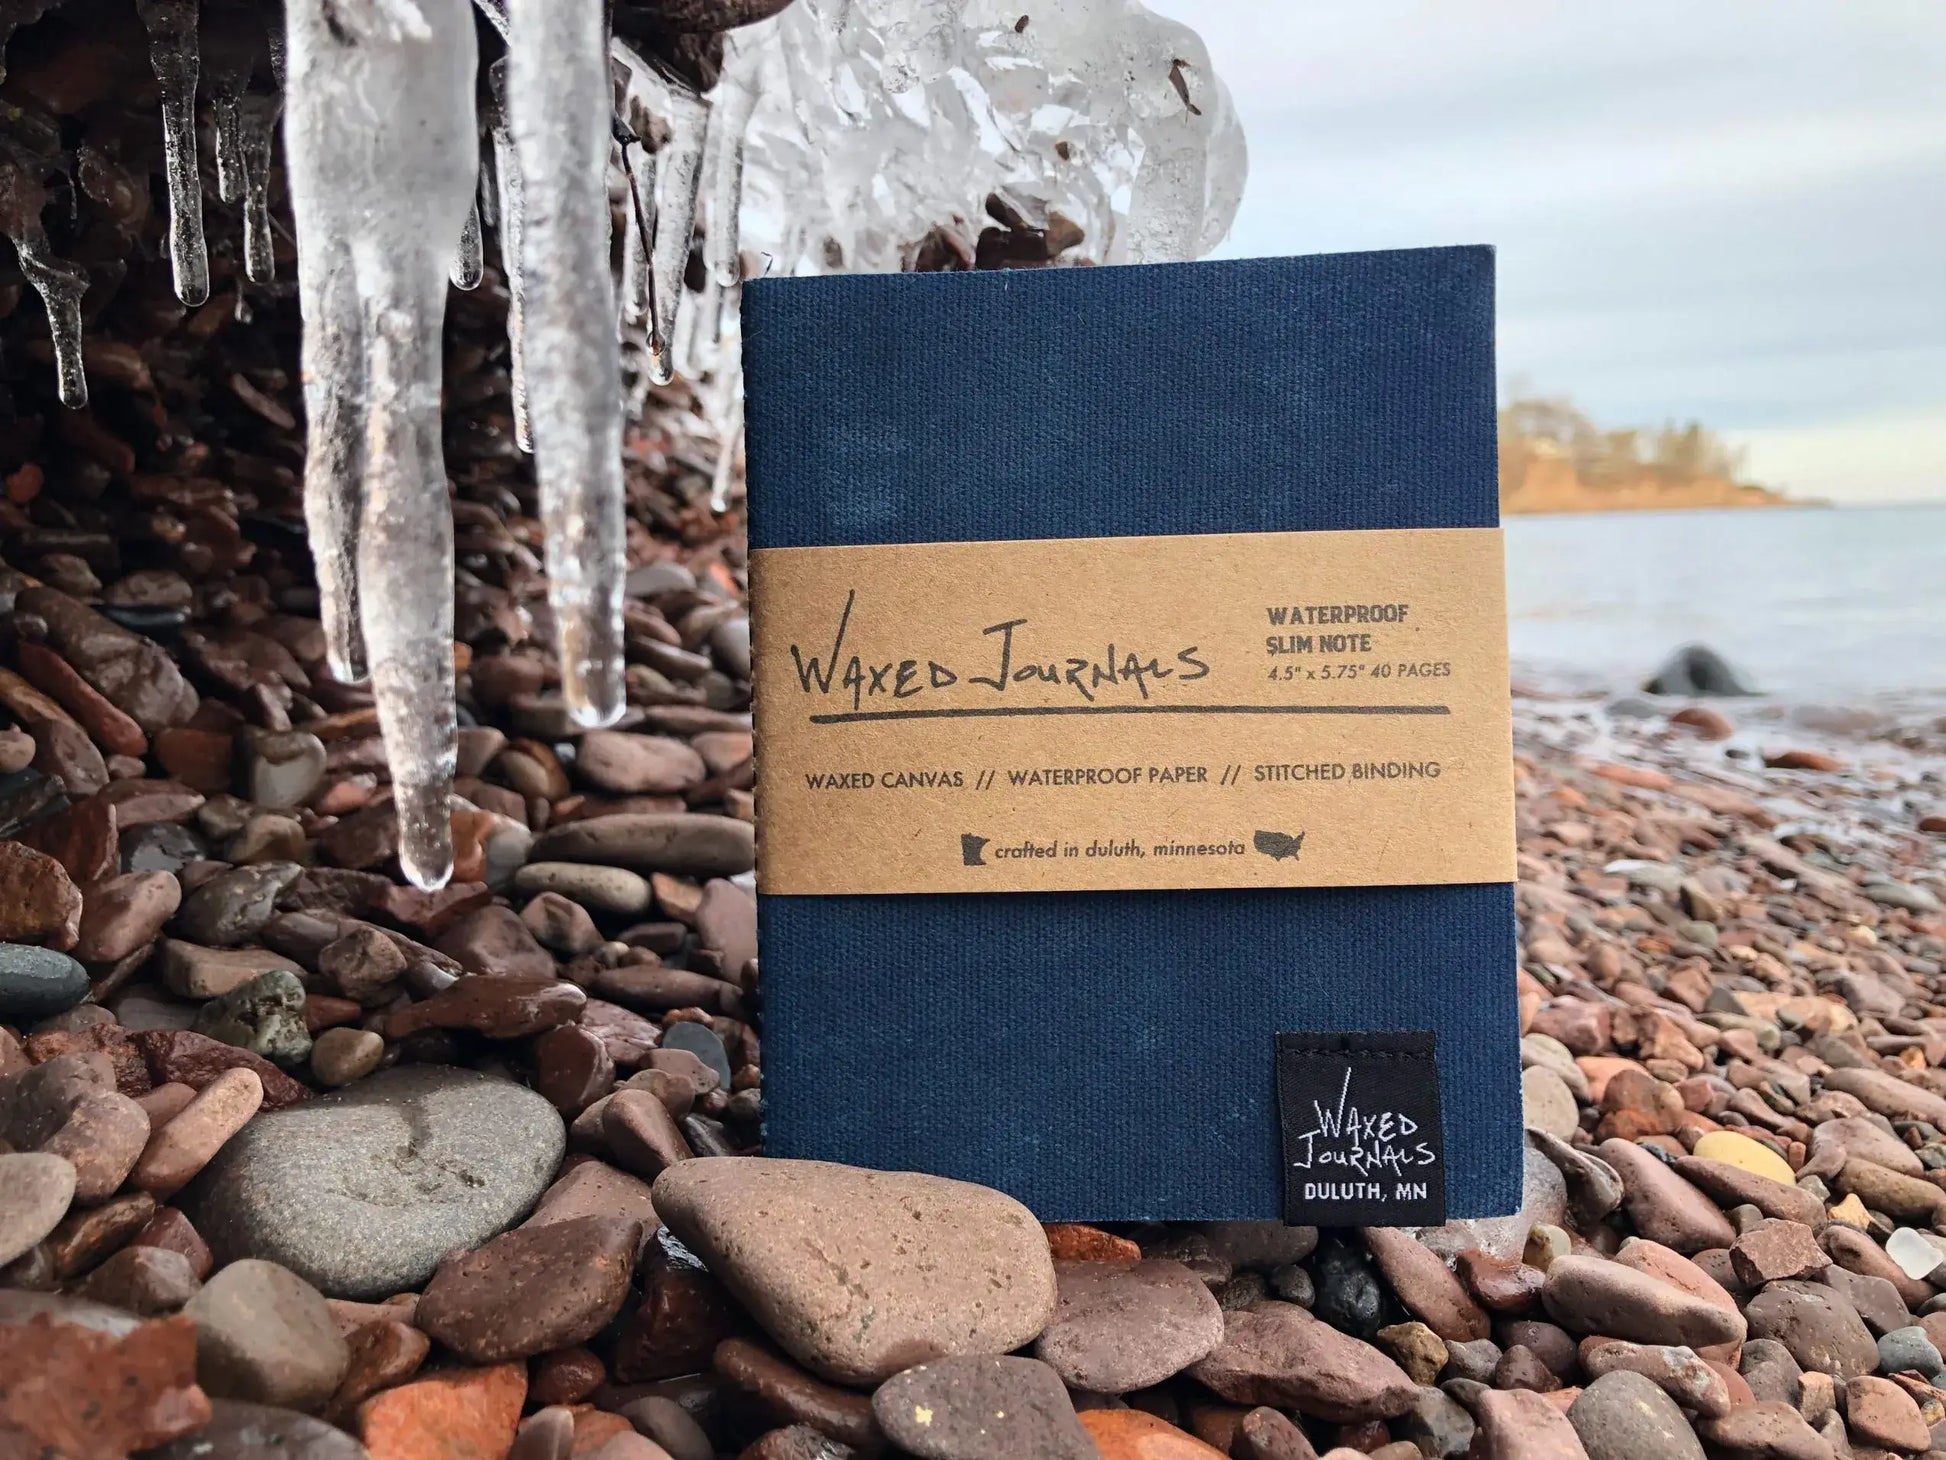 Blue waxed journal notebook in packaging outside on rocks next to ice.